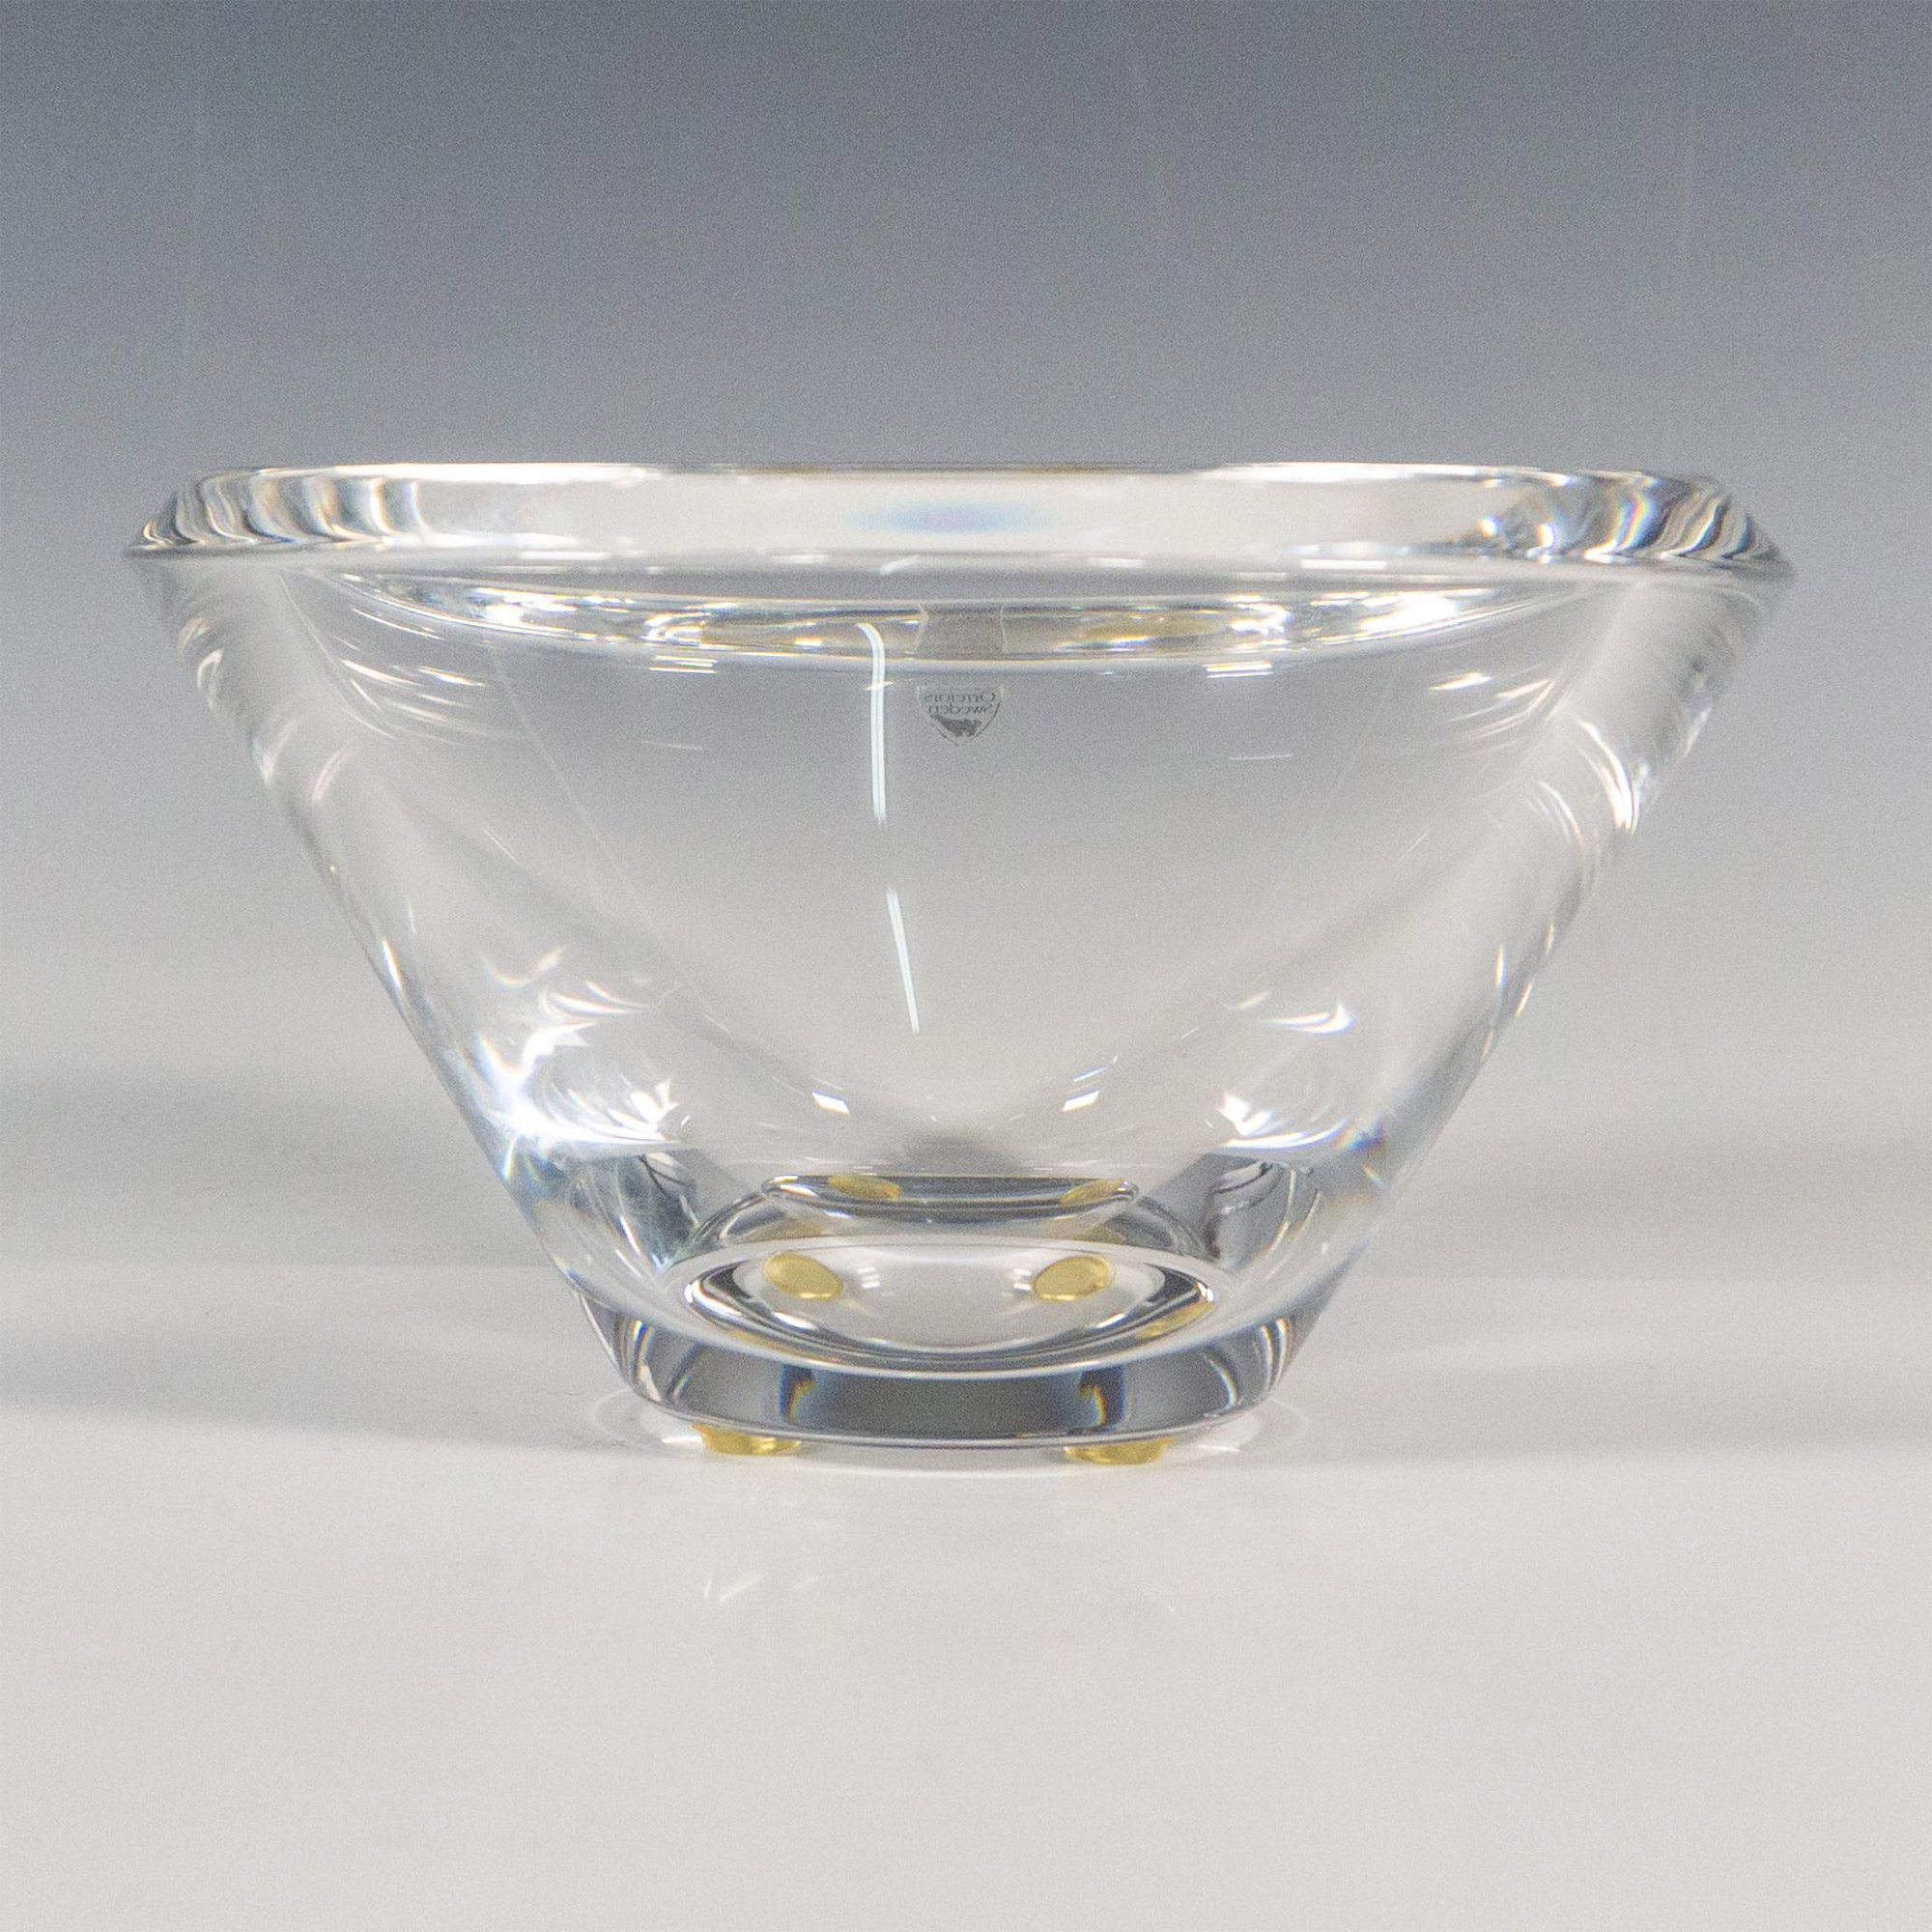 Orrefors by Lena Bergstrom Crystal Bowl, Roma - Image 2 of 4